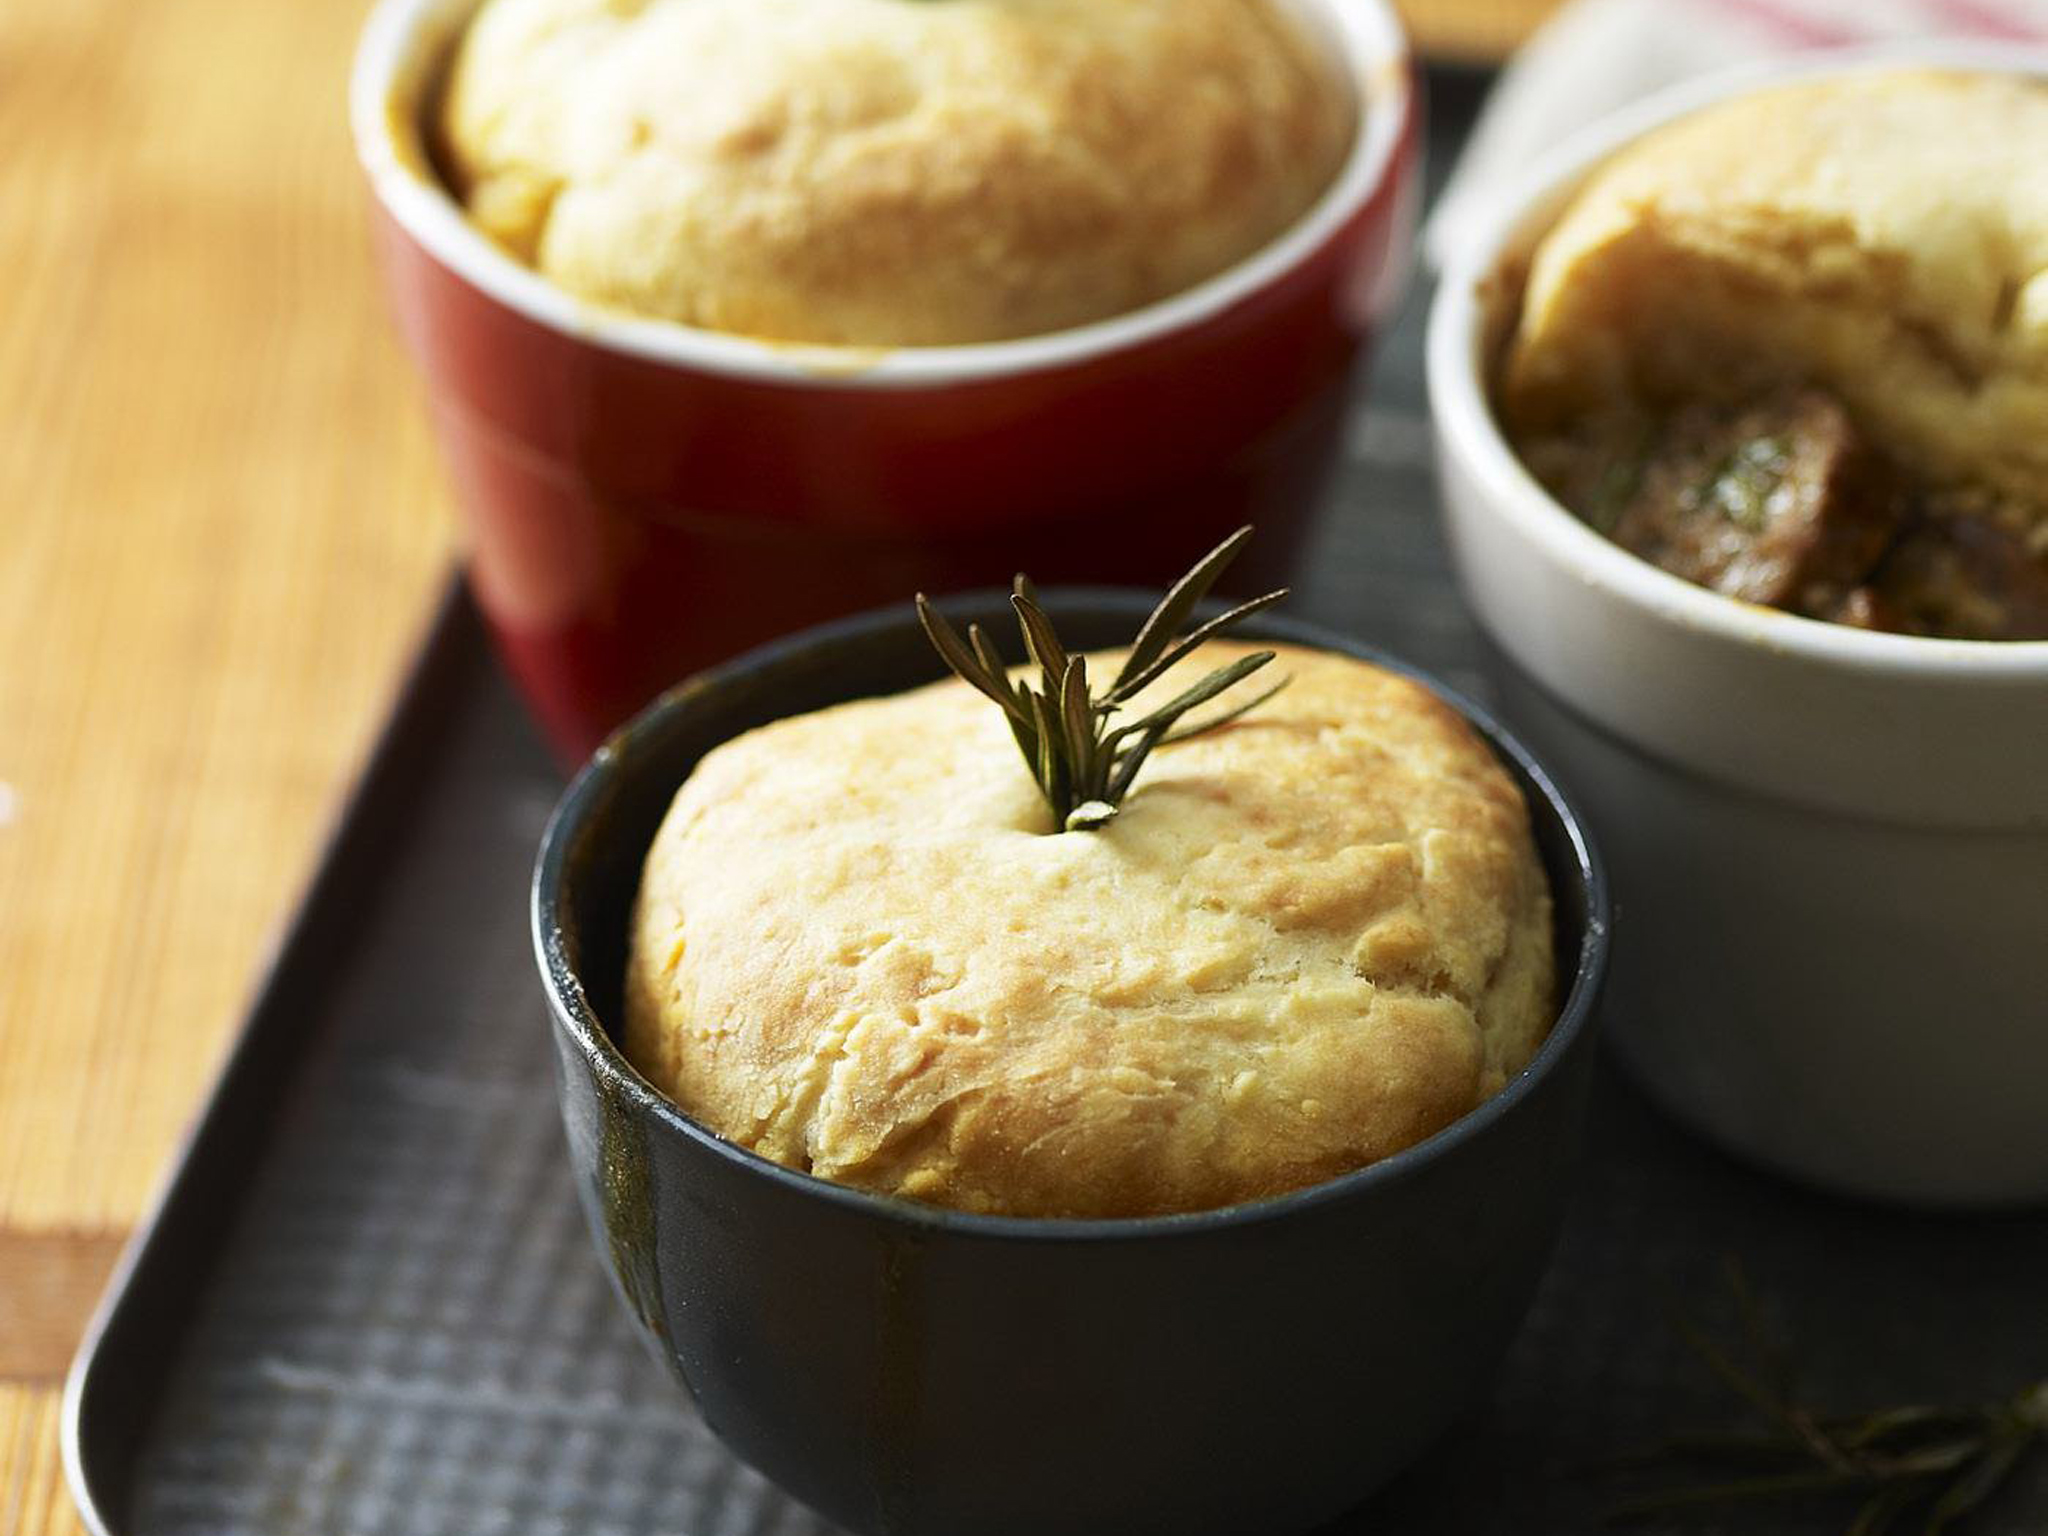 LAMB AND ROSEMARY PIES WITH SCONE TOPPING